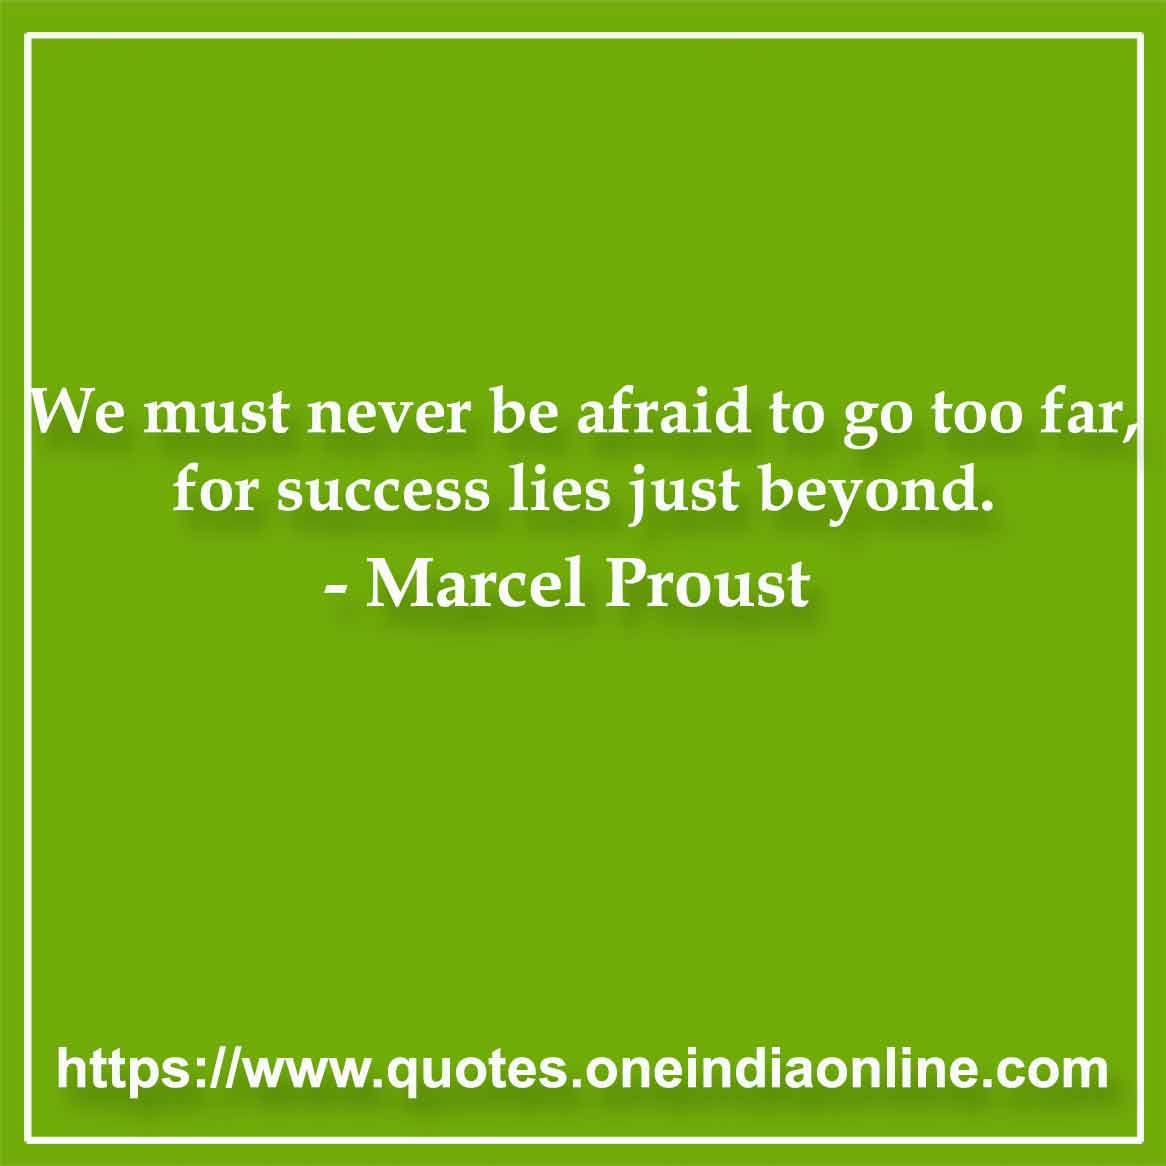 We must never be afraid to go too far, for success lies just beyond.

- Whatsapp Status by Marcel Proust